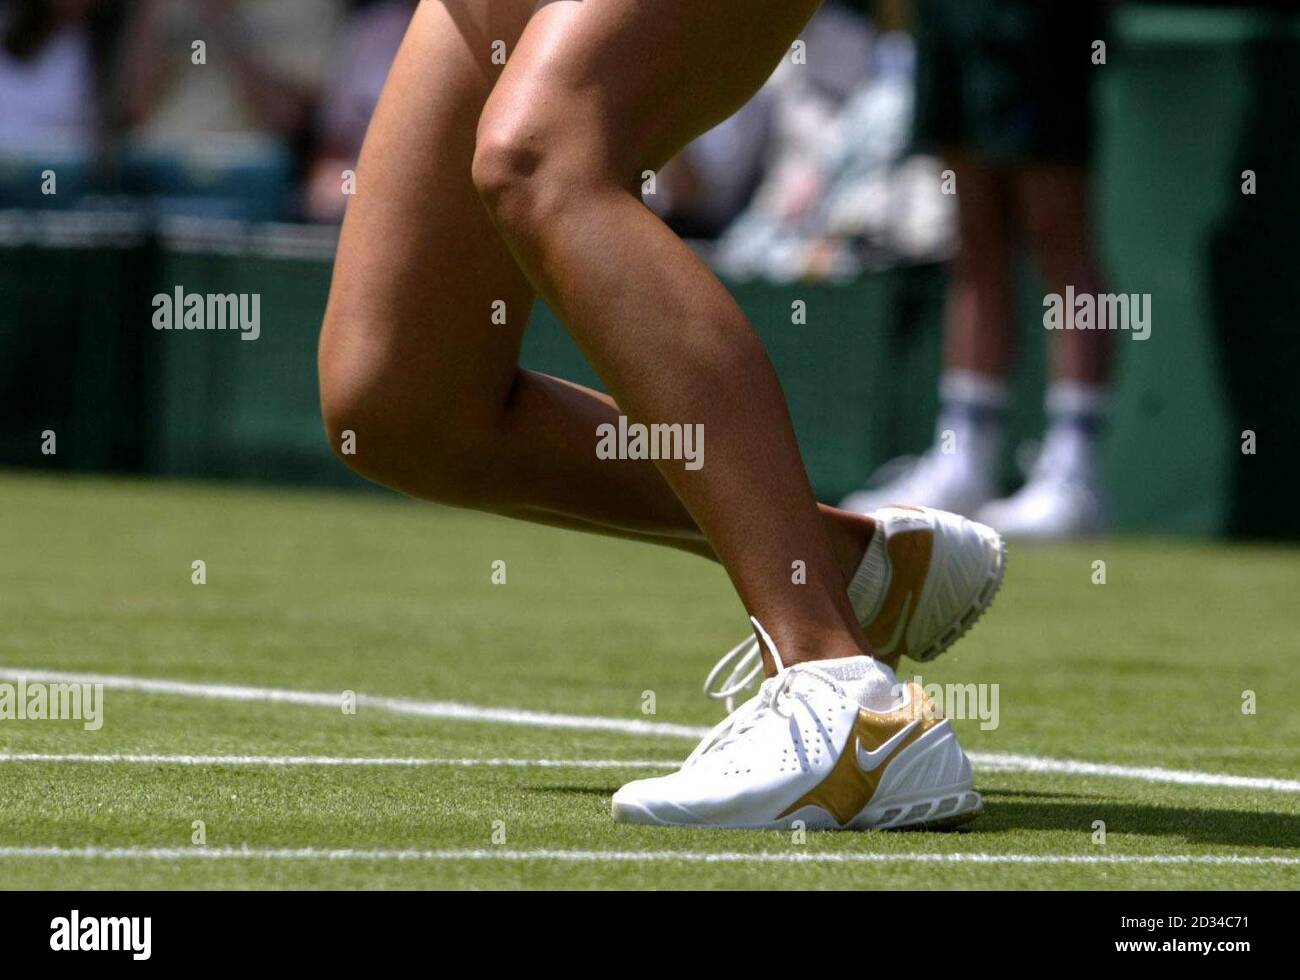 Russia's Maria Sharapova wearing her new gold speckled tennis shoes Stock  Photo - Alamy